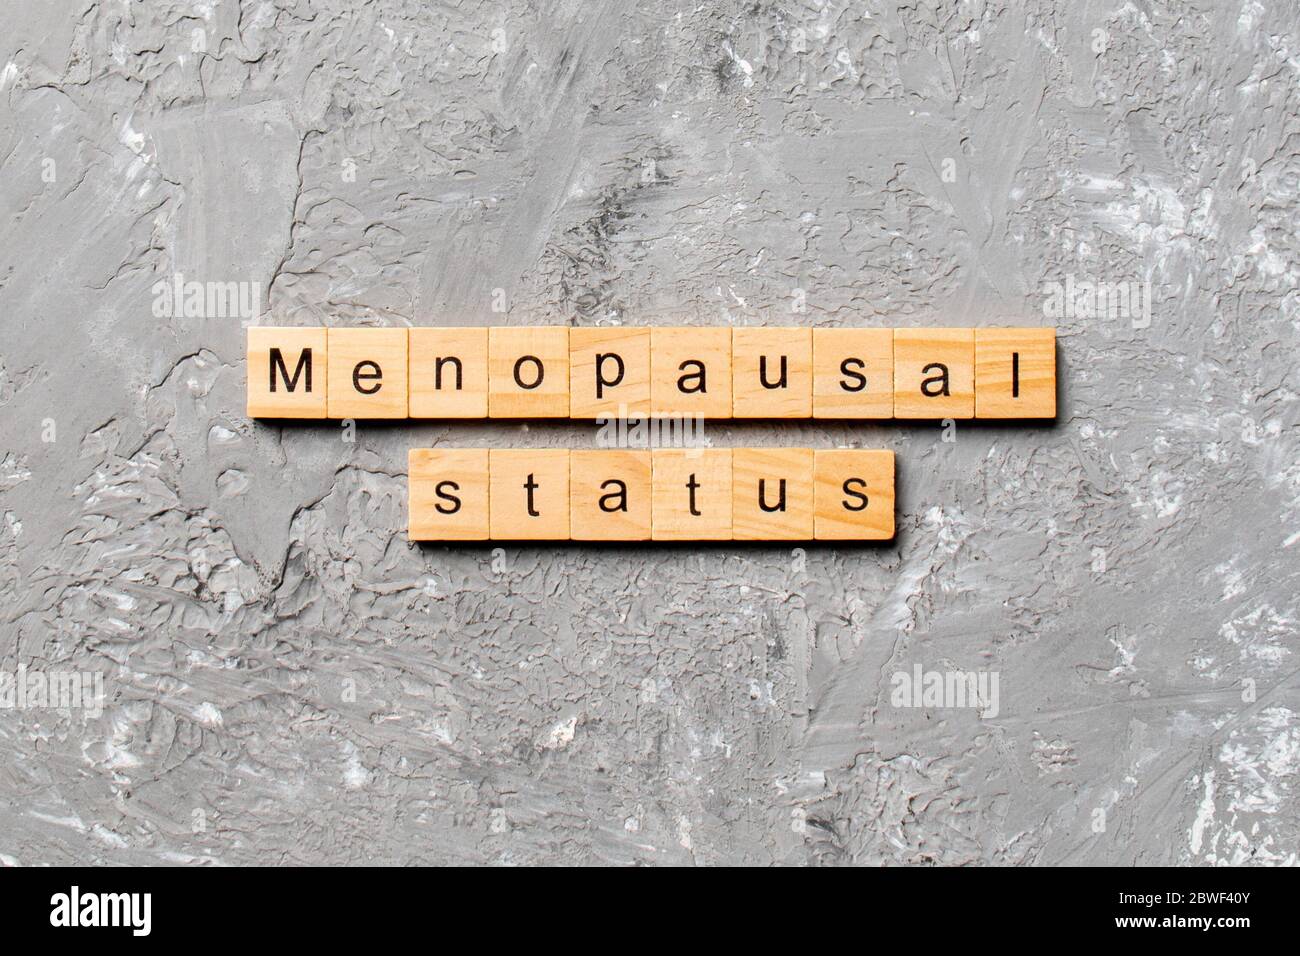 menopausal status word written on wood block. menopause status text on cement table for your desing, concept. Stock Photo